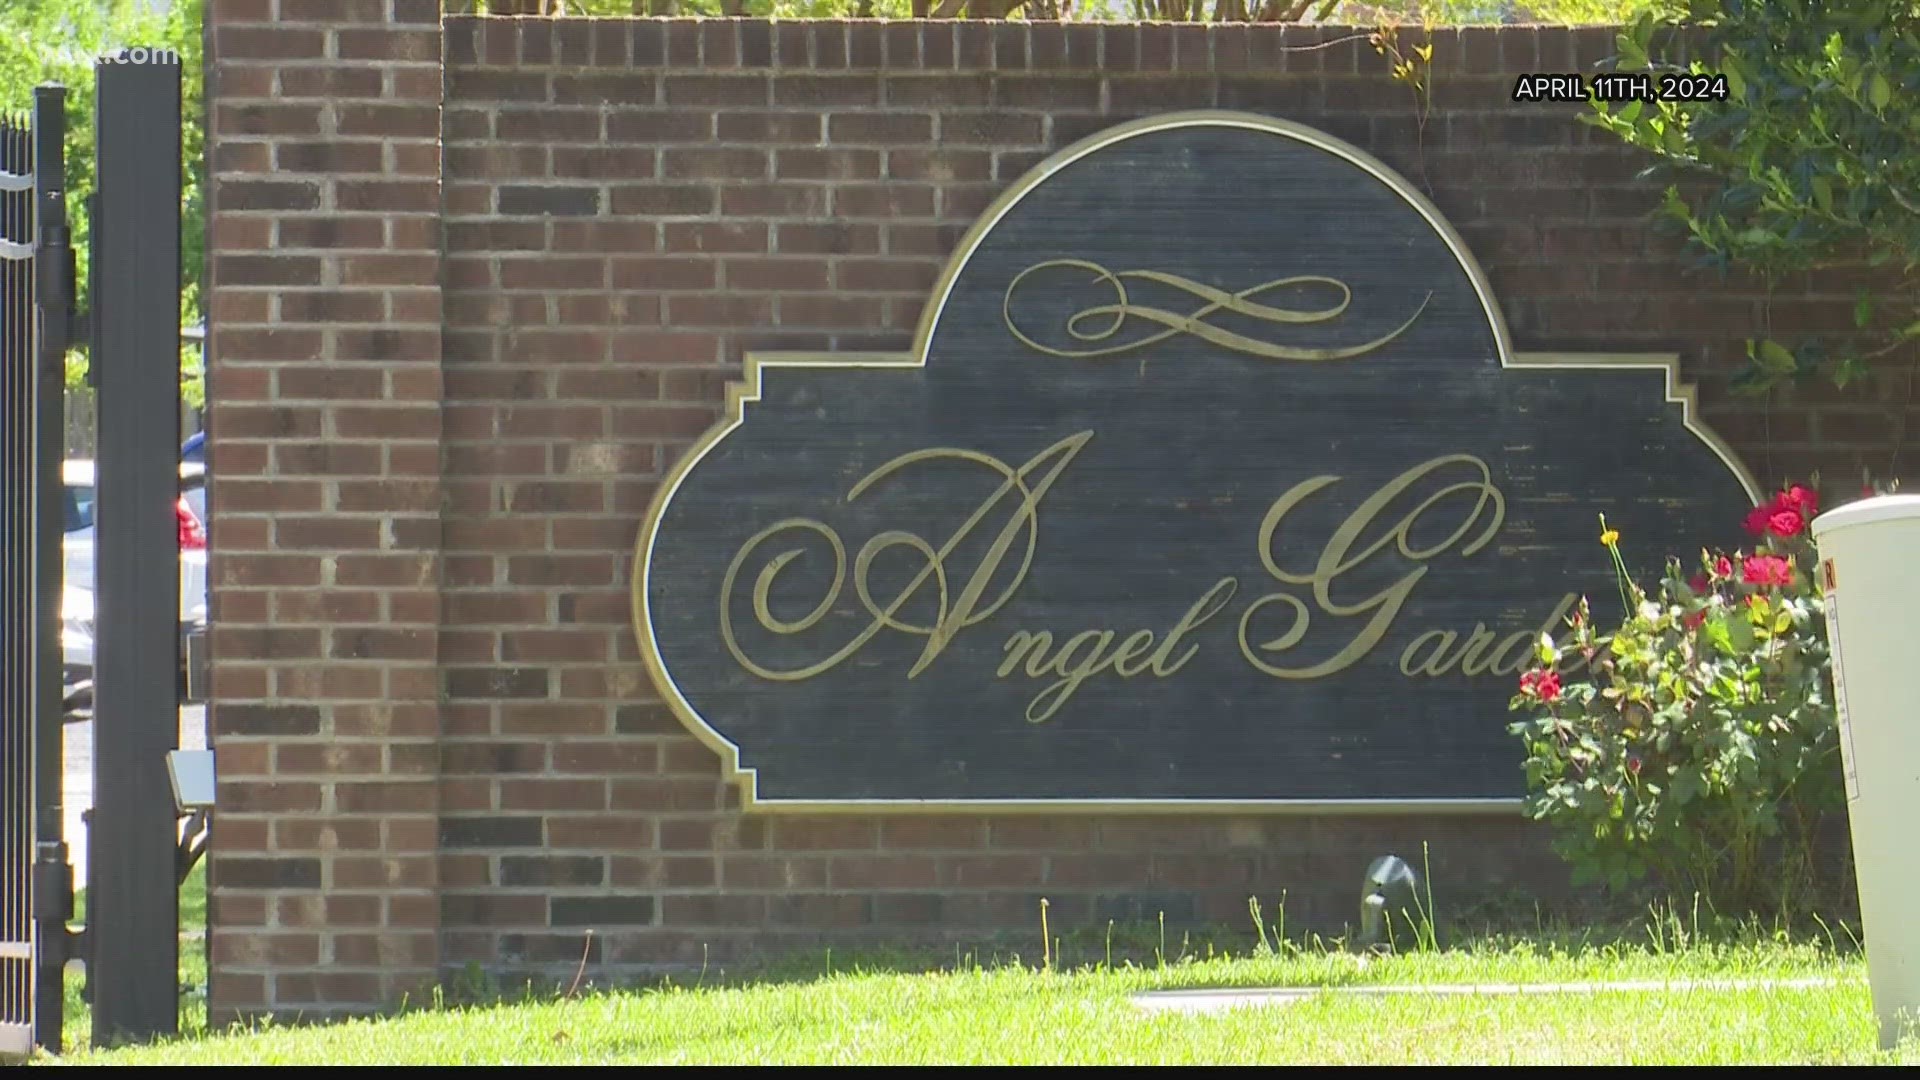 The 14-year-old was released from the hospital Monday after he was involved in a shooting last Thursday on Angel Garden Way.